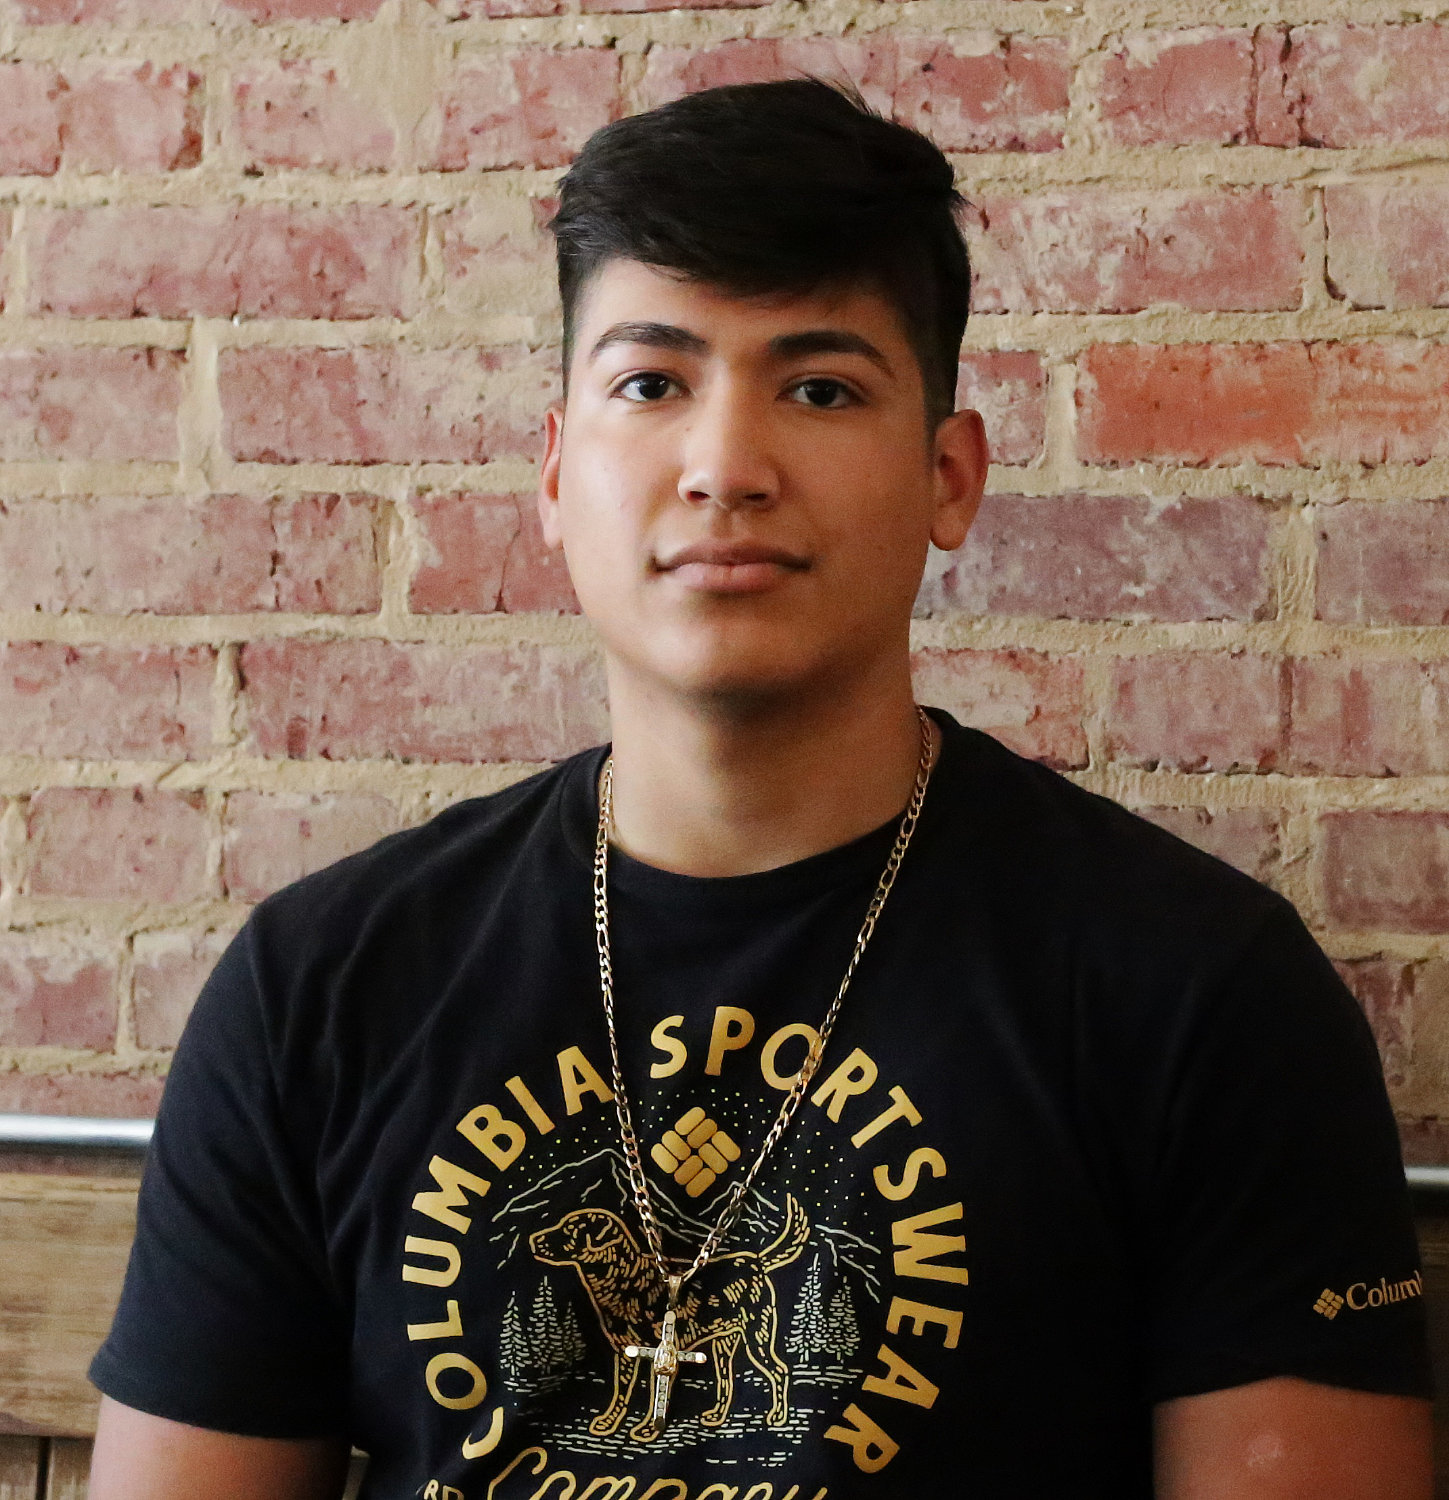 Quitman senior Stephen Ortiz will walk to receive his diploma next month as a member of the Texas Army National Guard.